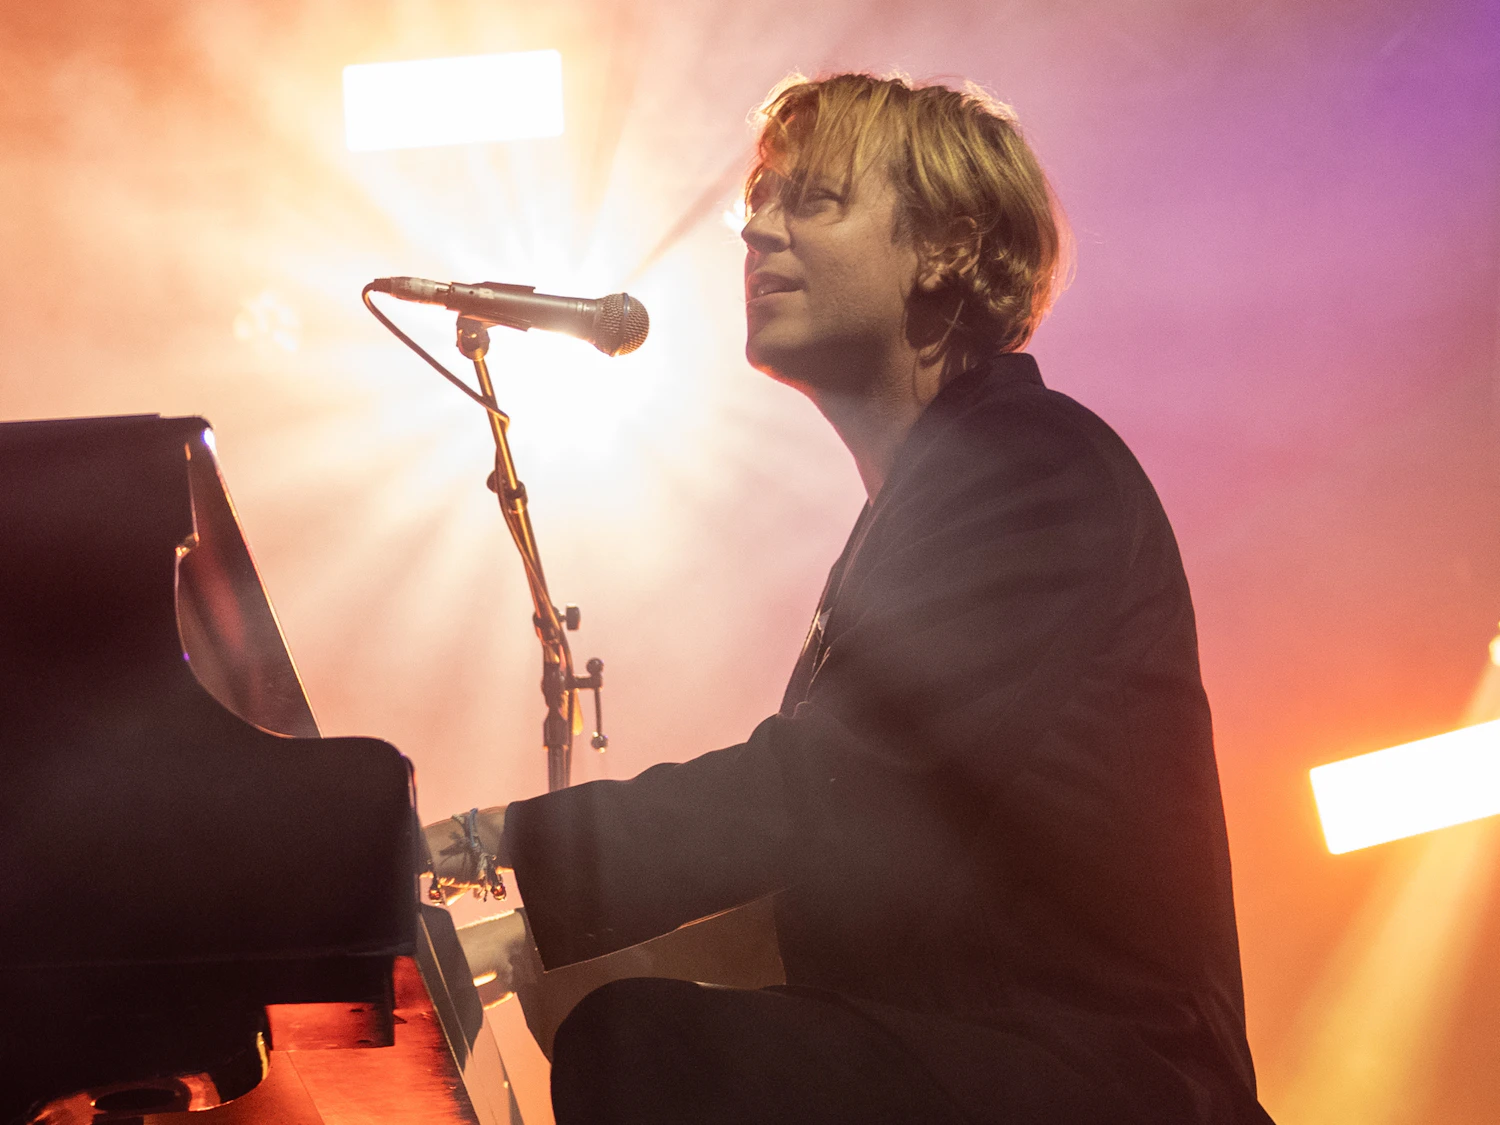 Tom Odell - Another Love (Vevo Presents: Live at Spiegelsaal